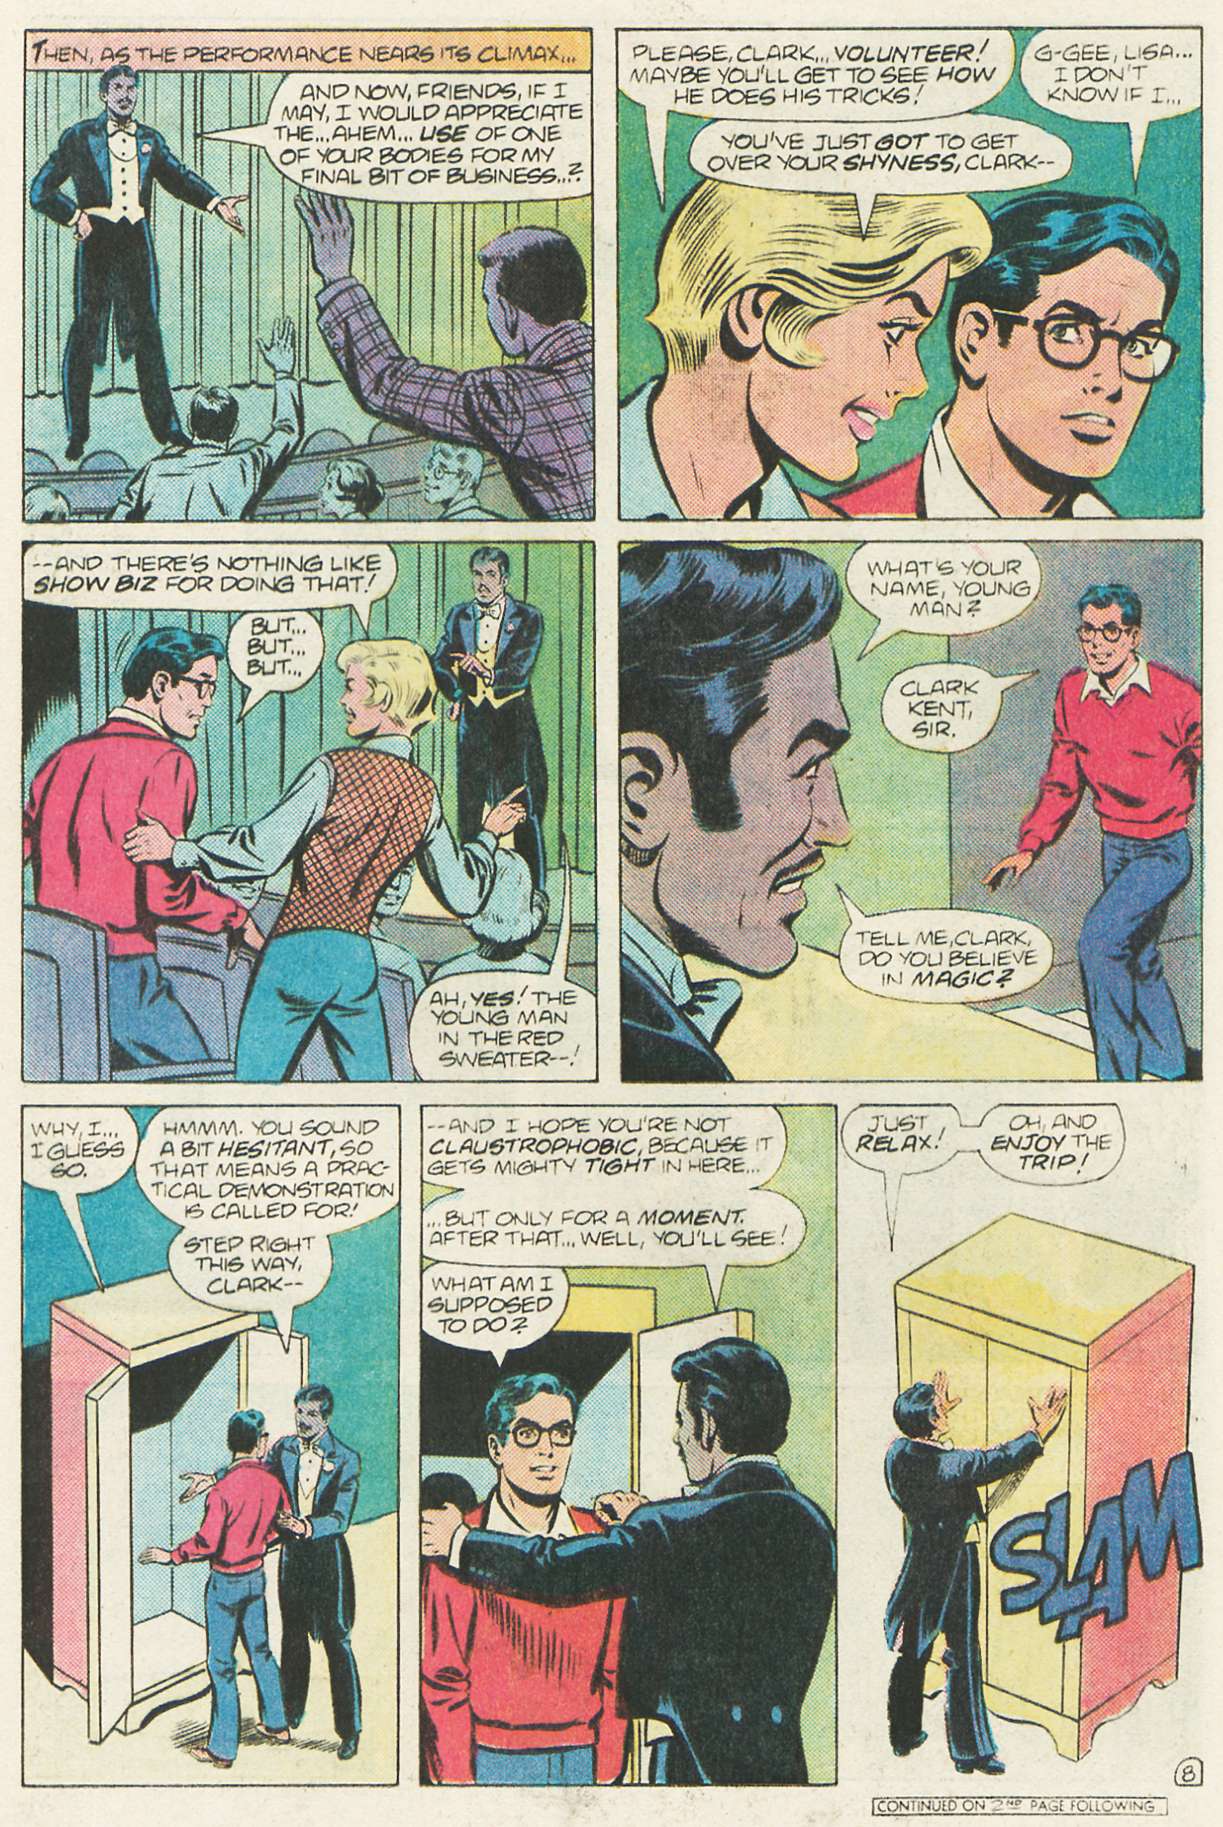 The New Adventures of Superboy 49 Page 8